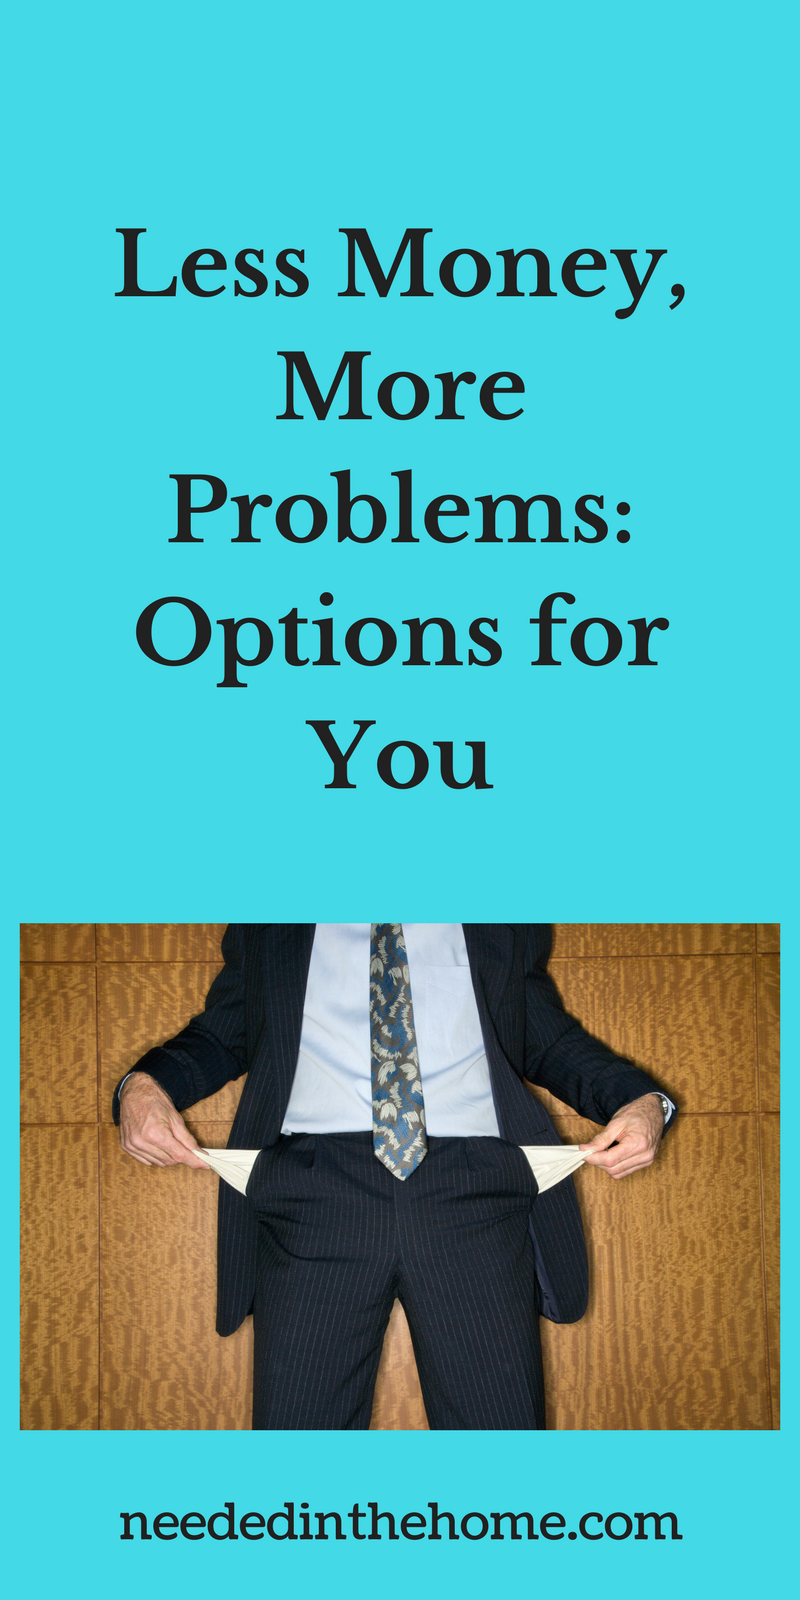 man in business suit with empty pockets Less Money, More Problems: Options for You by neededinthehome.com